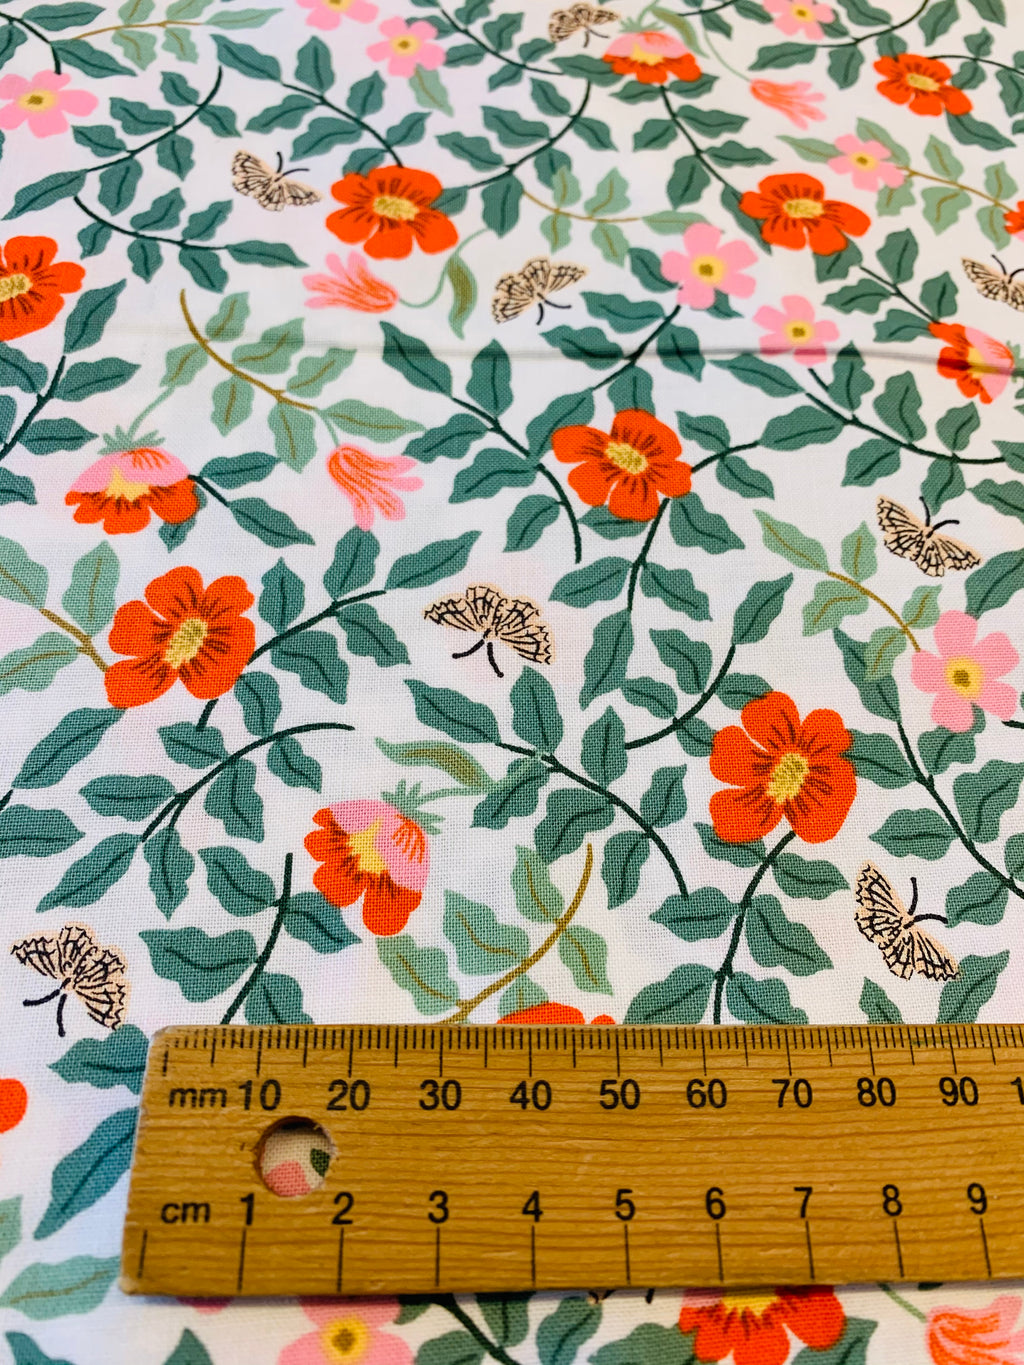 Rifle Paper Co: Strawberry Fields/Primrose cotton in ivory